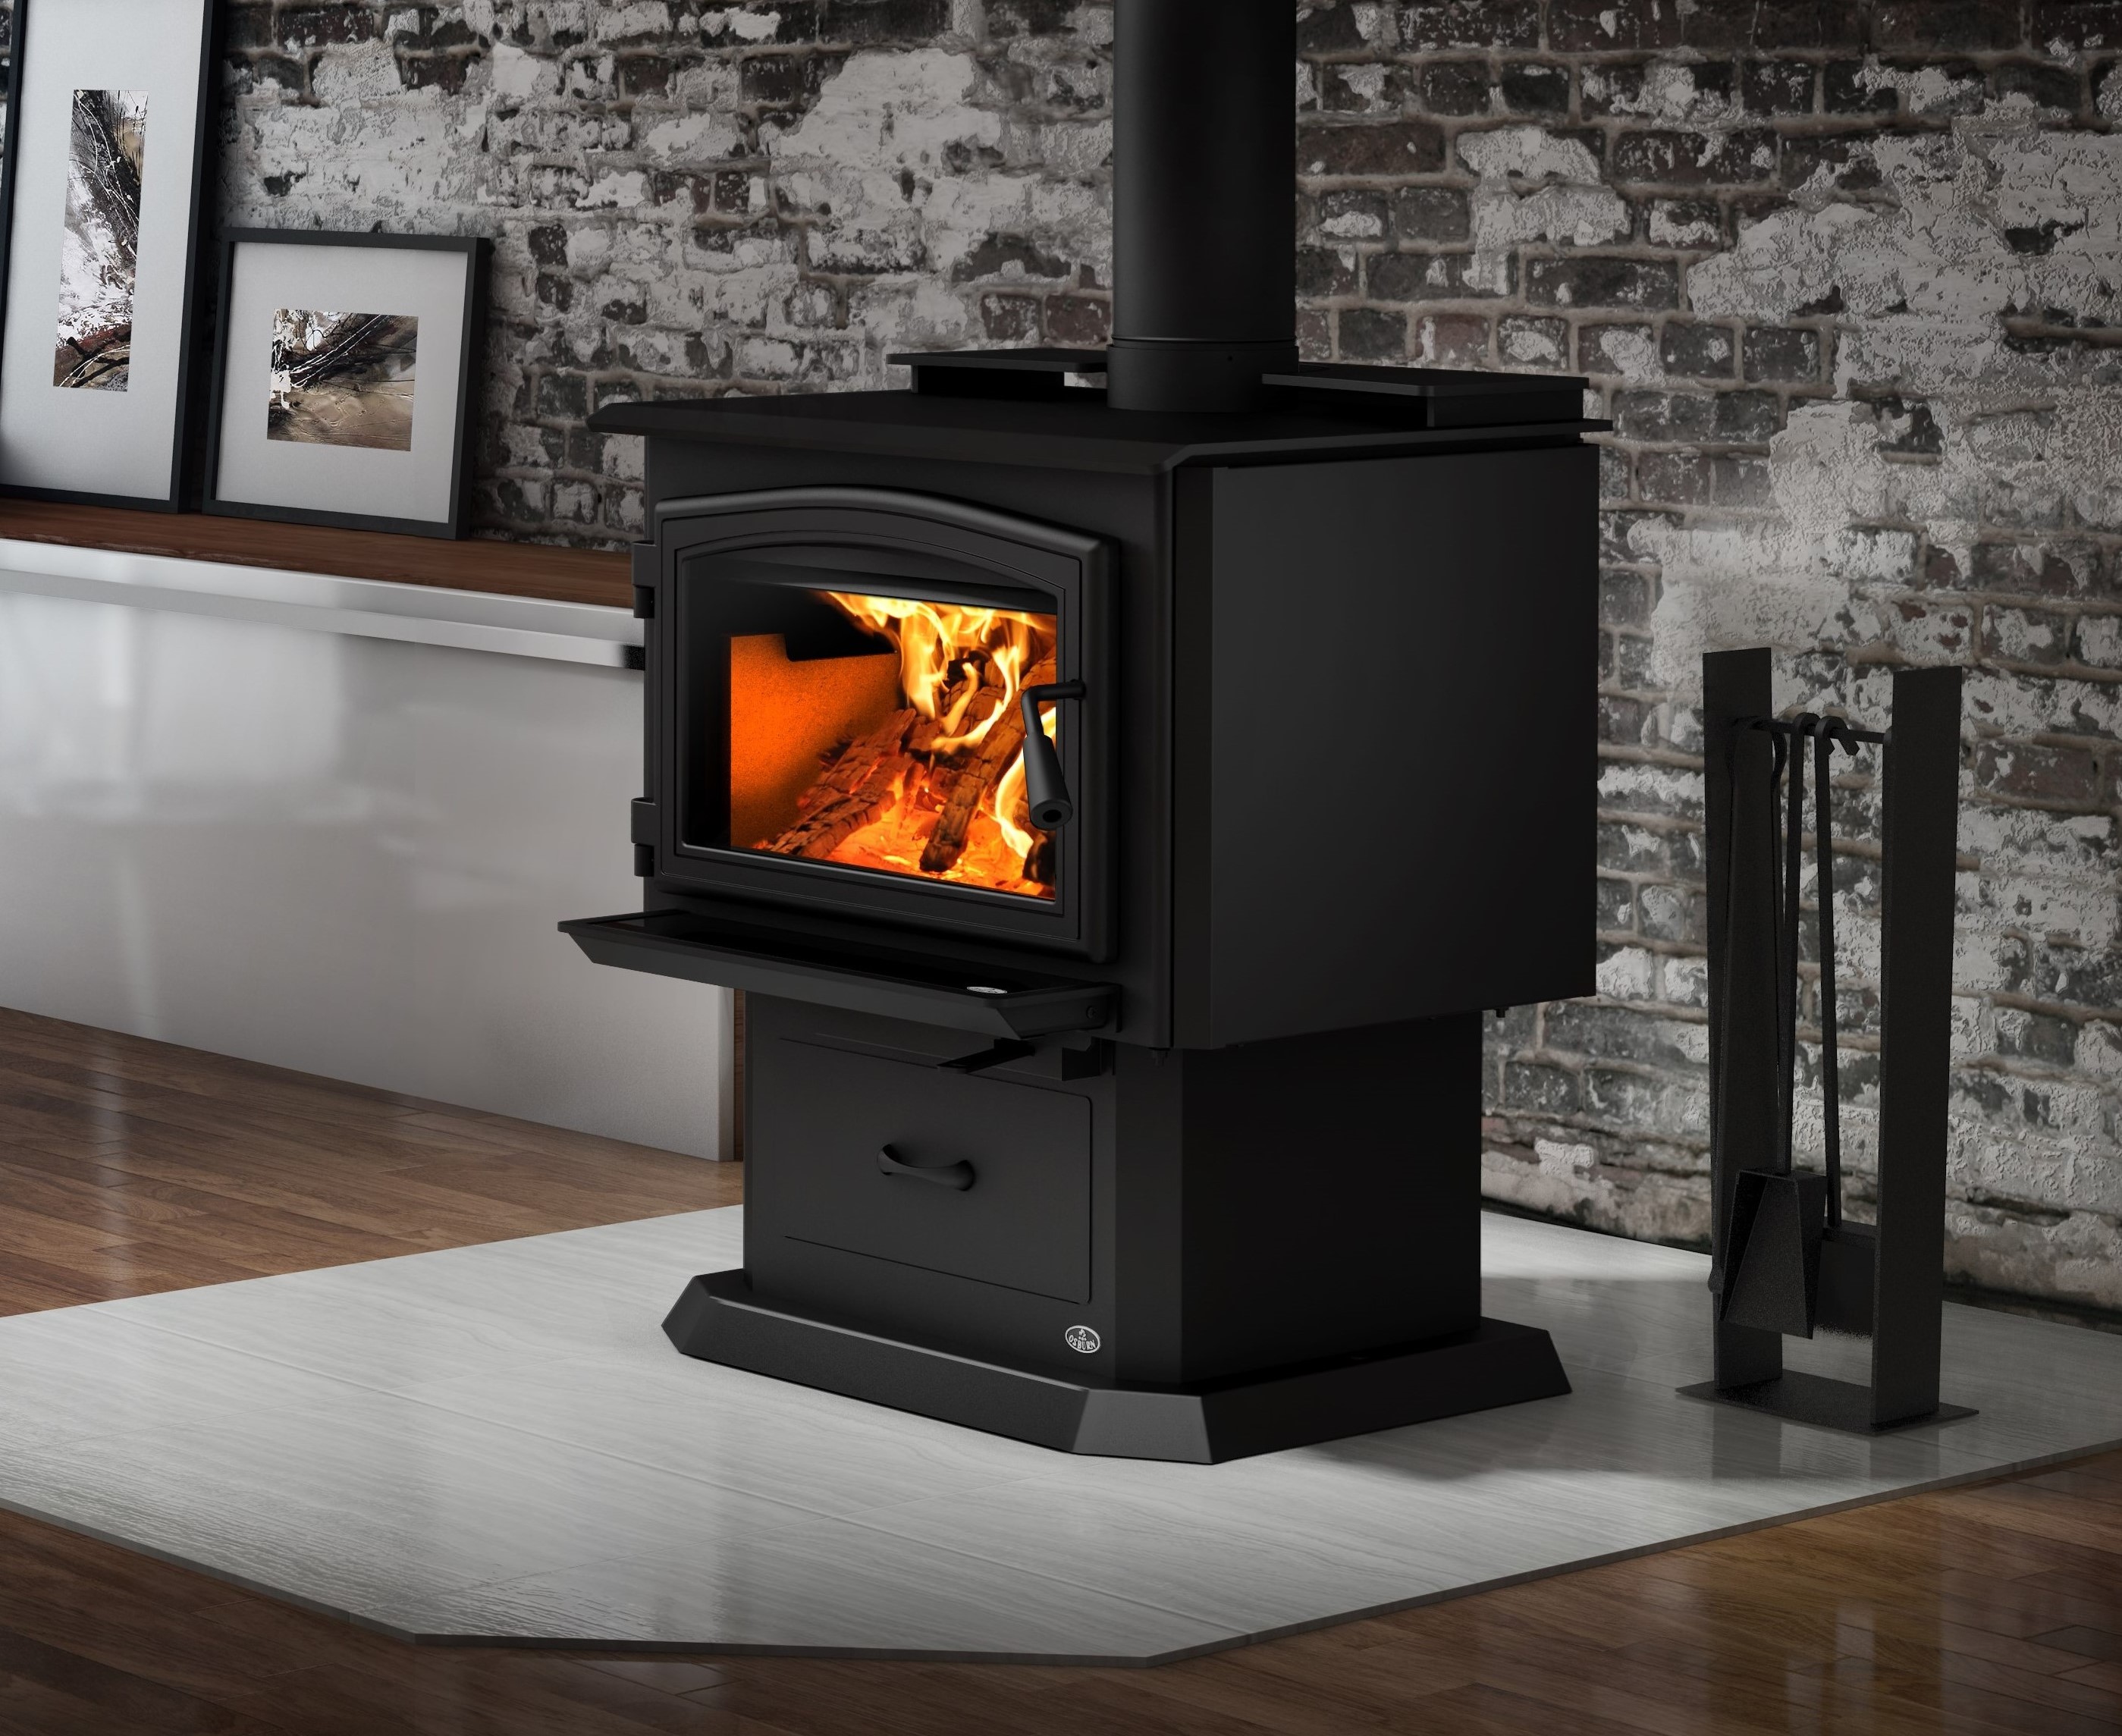 link to Osburn 2000 wood stove product page